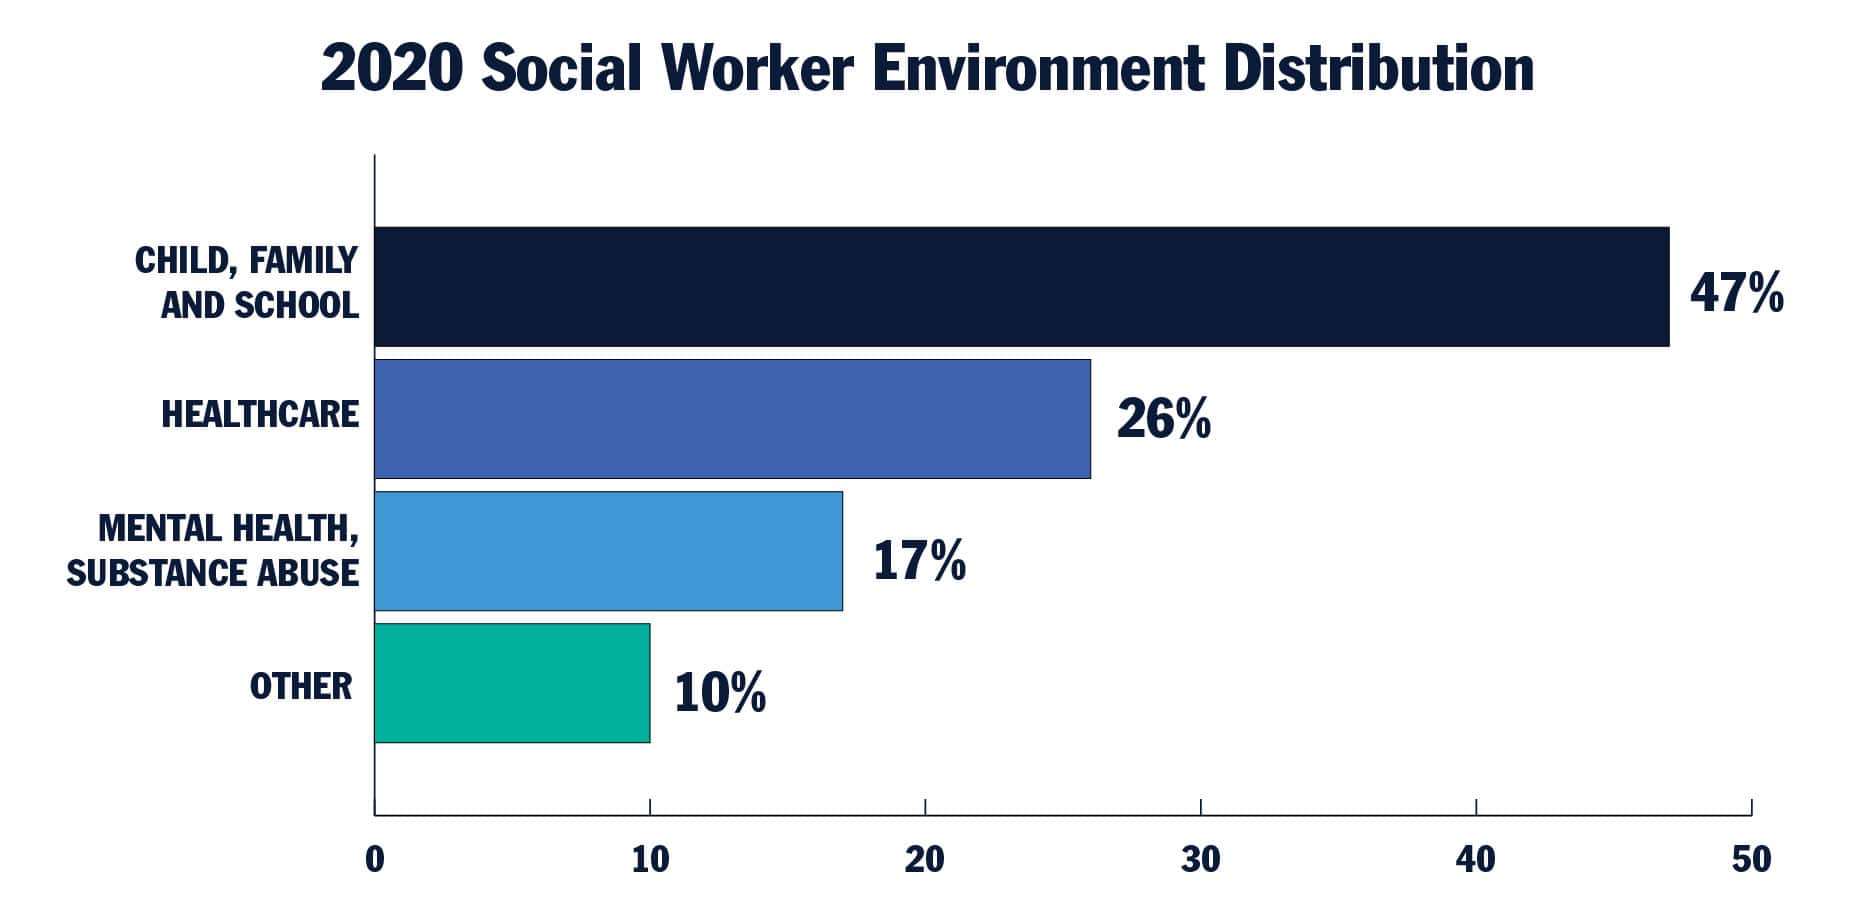 Infographic with the text 2020 Social Worker Environment Distribution  - 47% - Child, family and school  - 26% - Healthcare  - 17% - Mental health, substance abuse  - 10% - Other